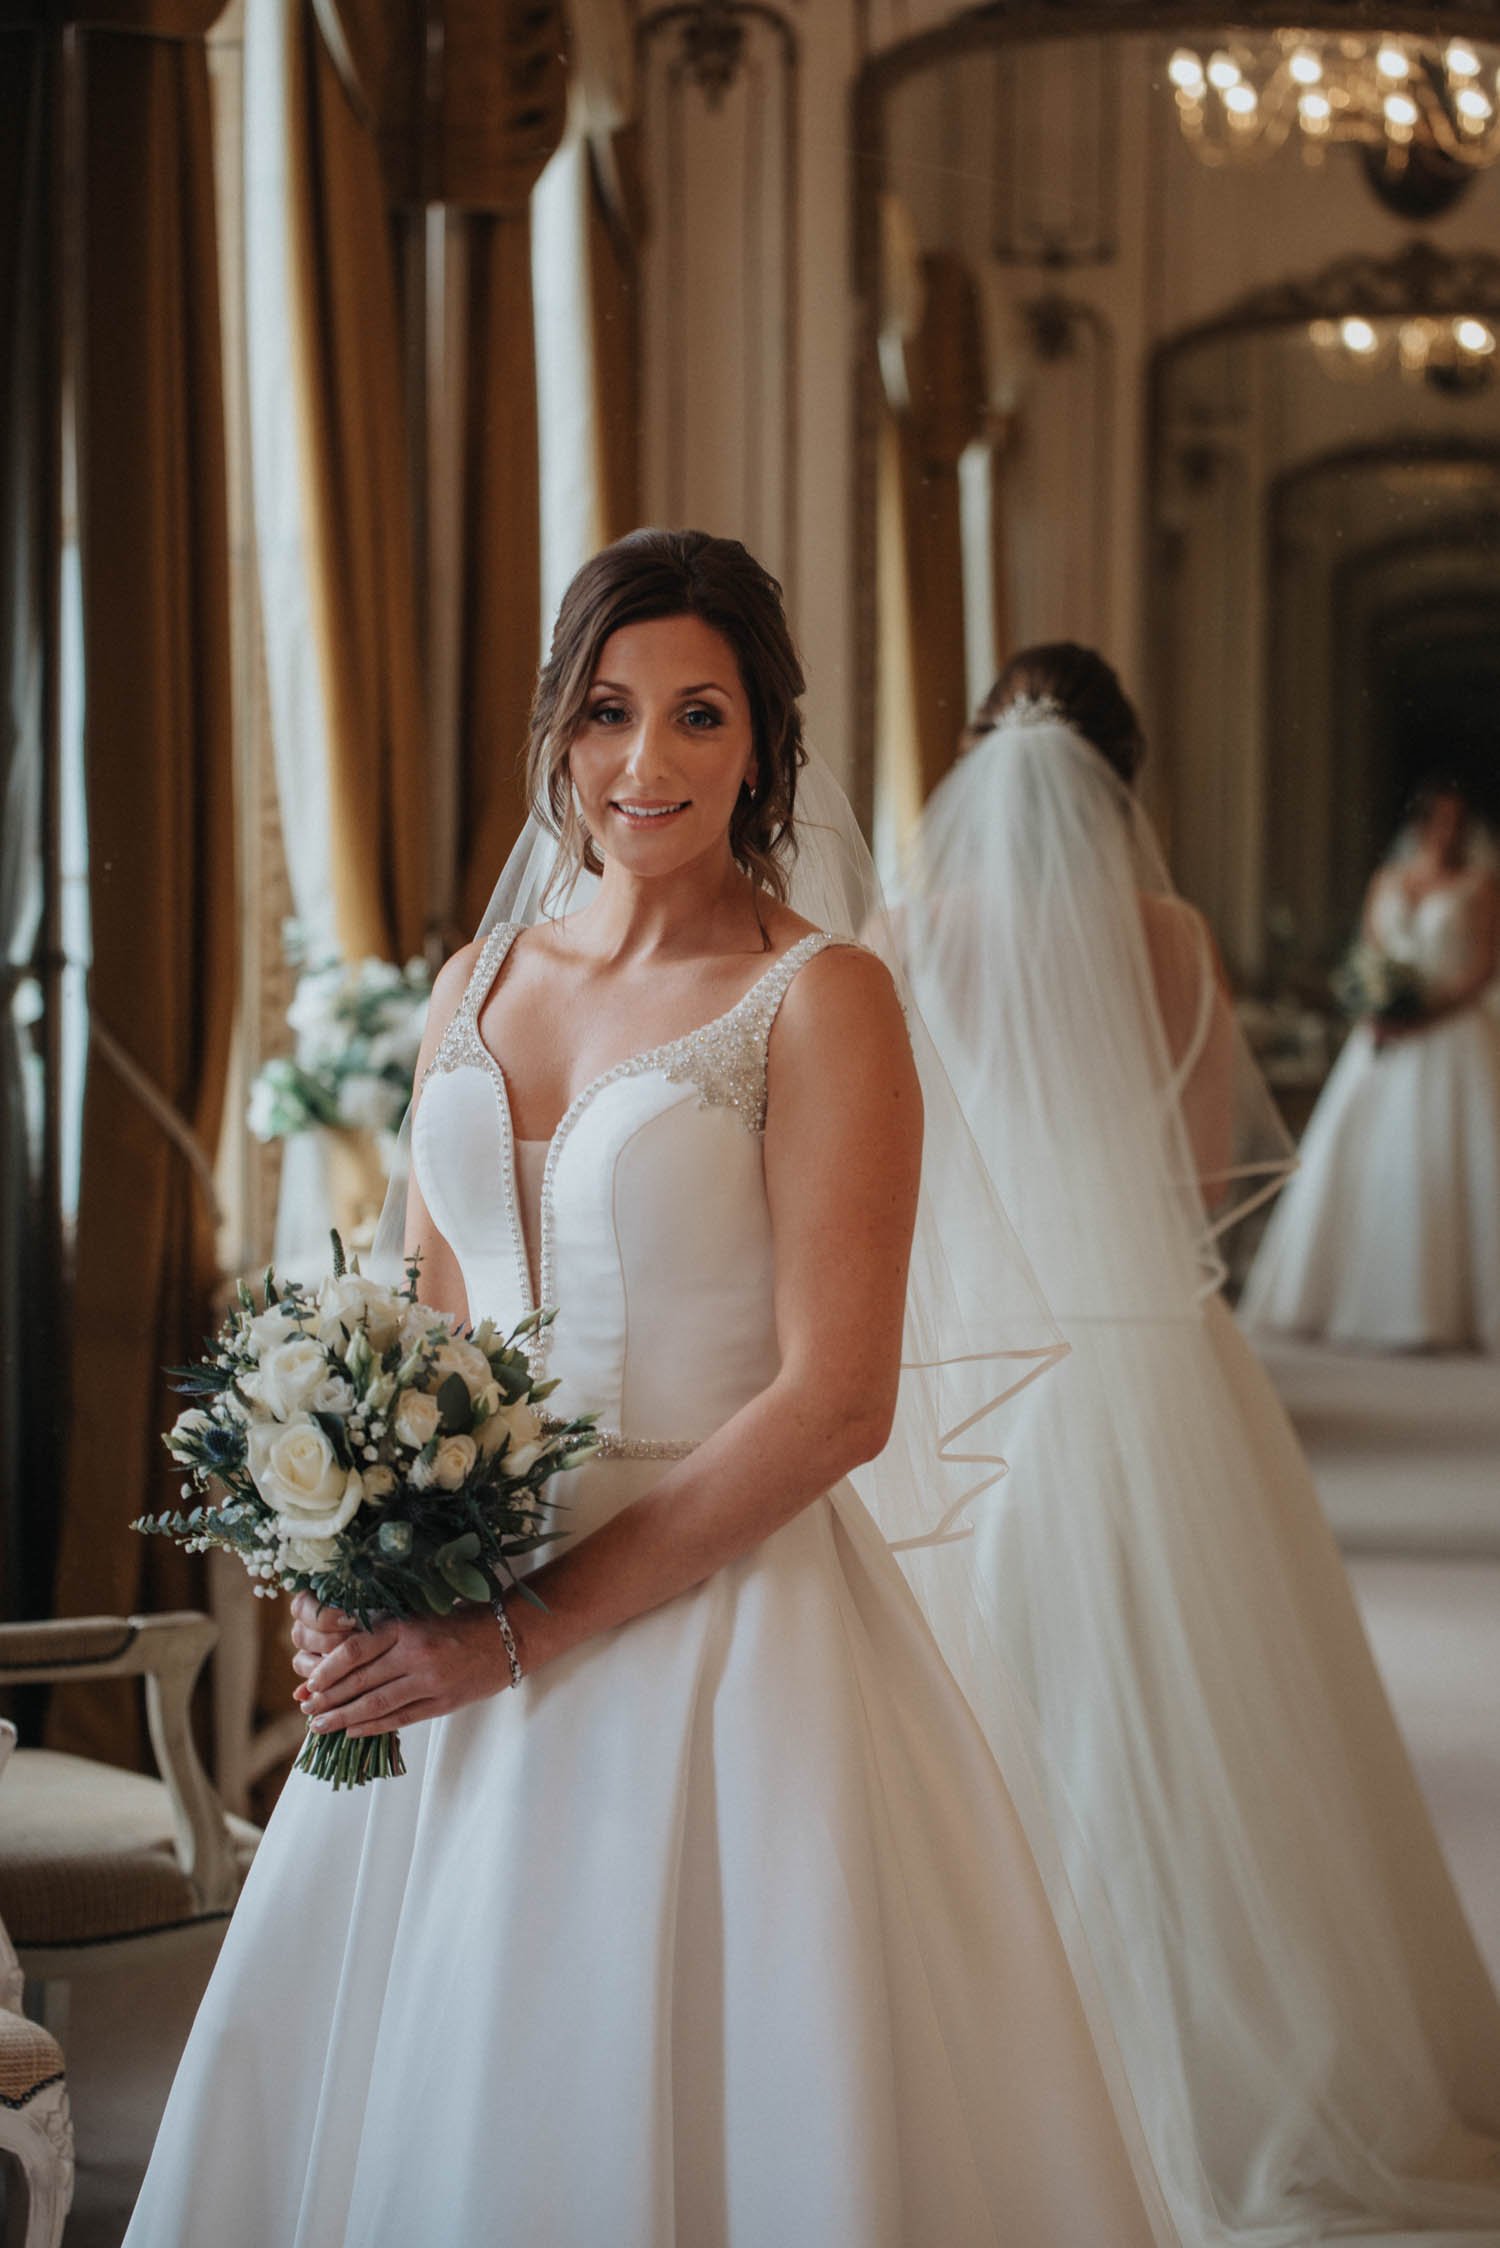 Bride with bouquet in bridal suite with large mirror in the background